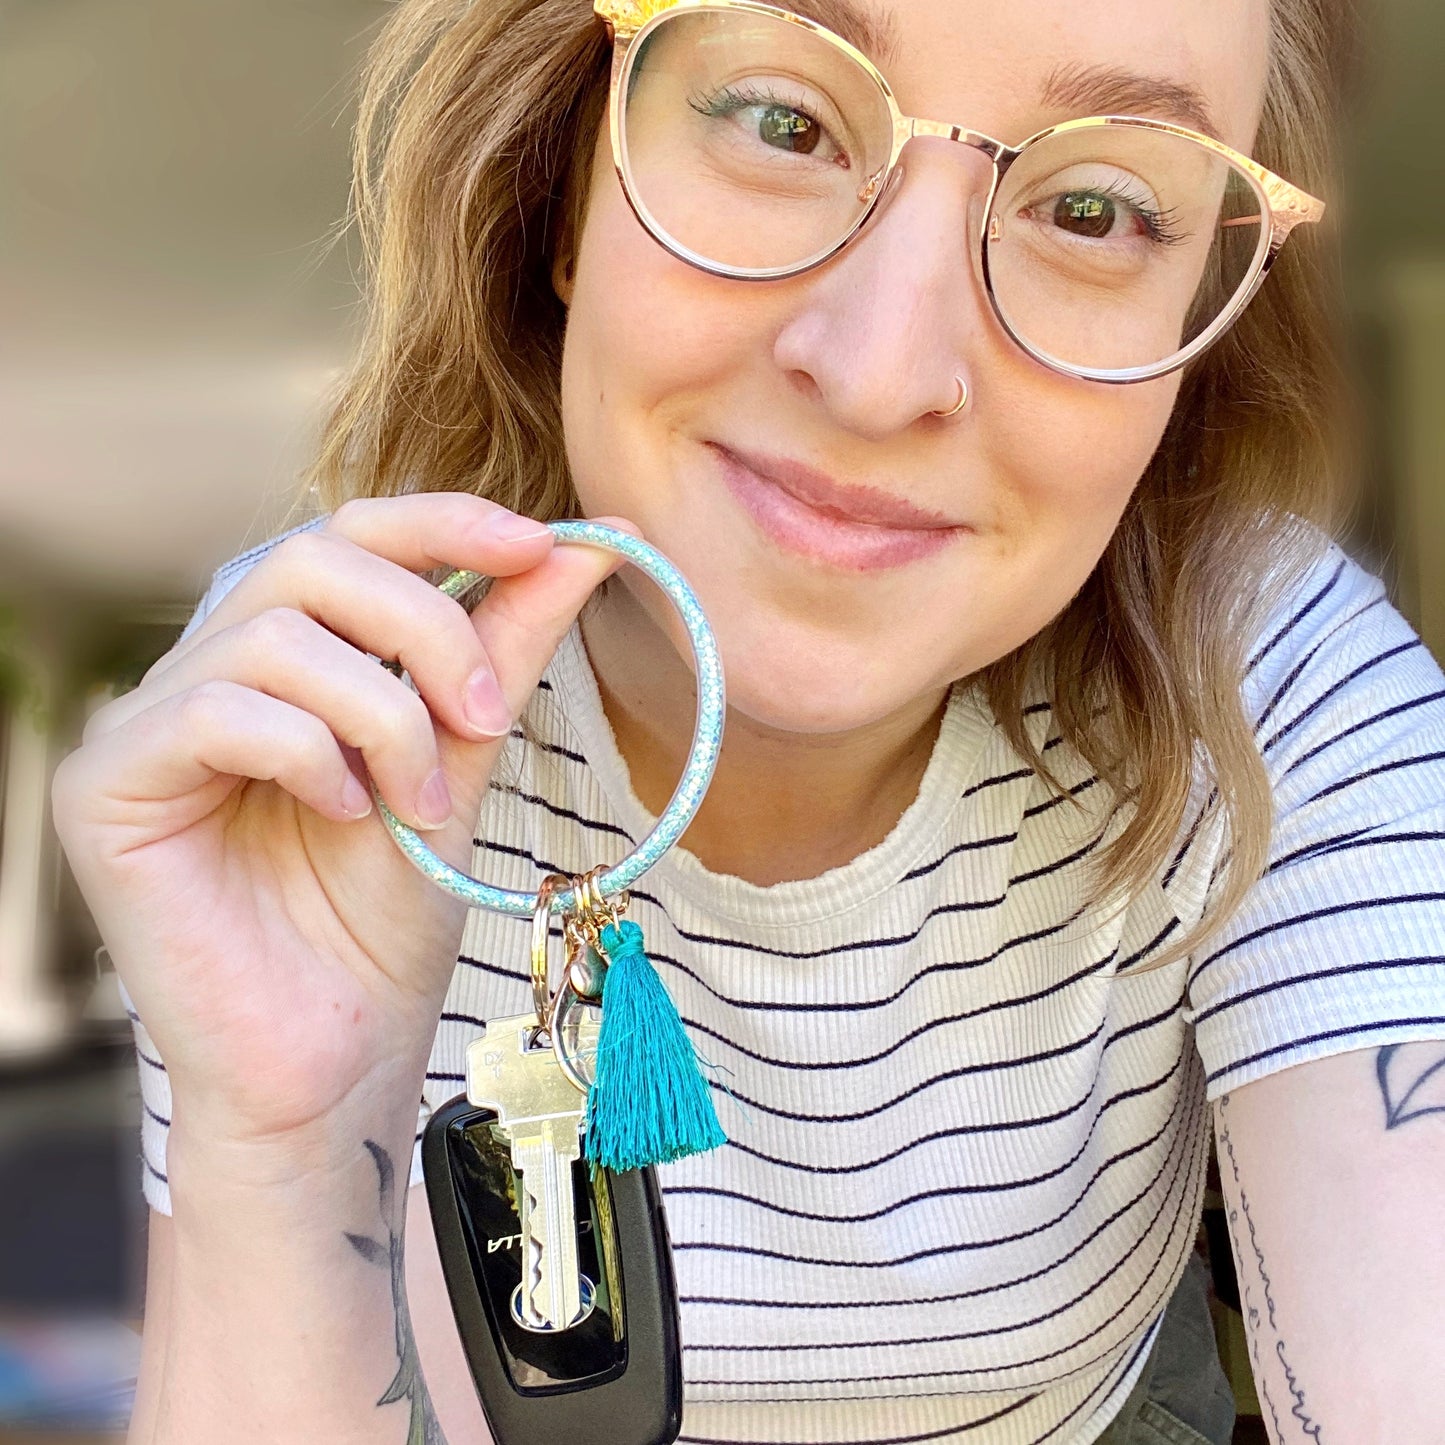 carry your house keys and car keys in style! this keychain adds big convenience!